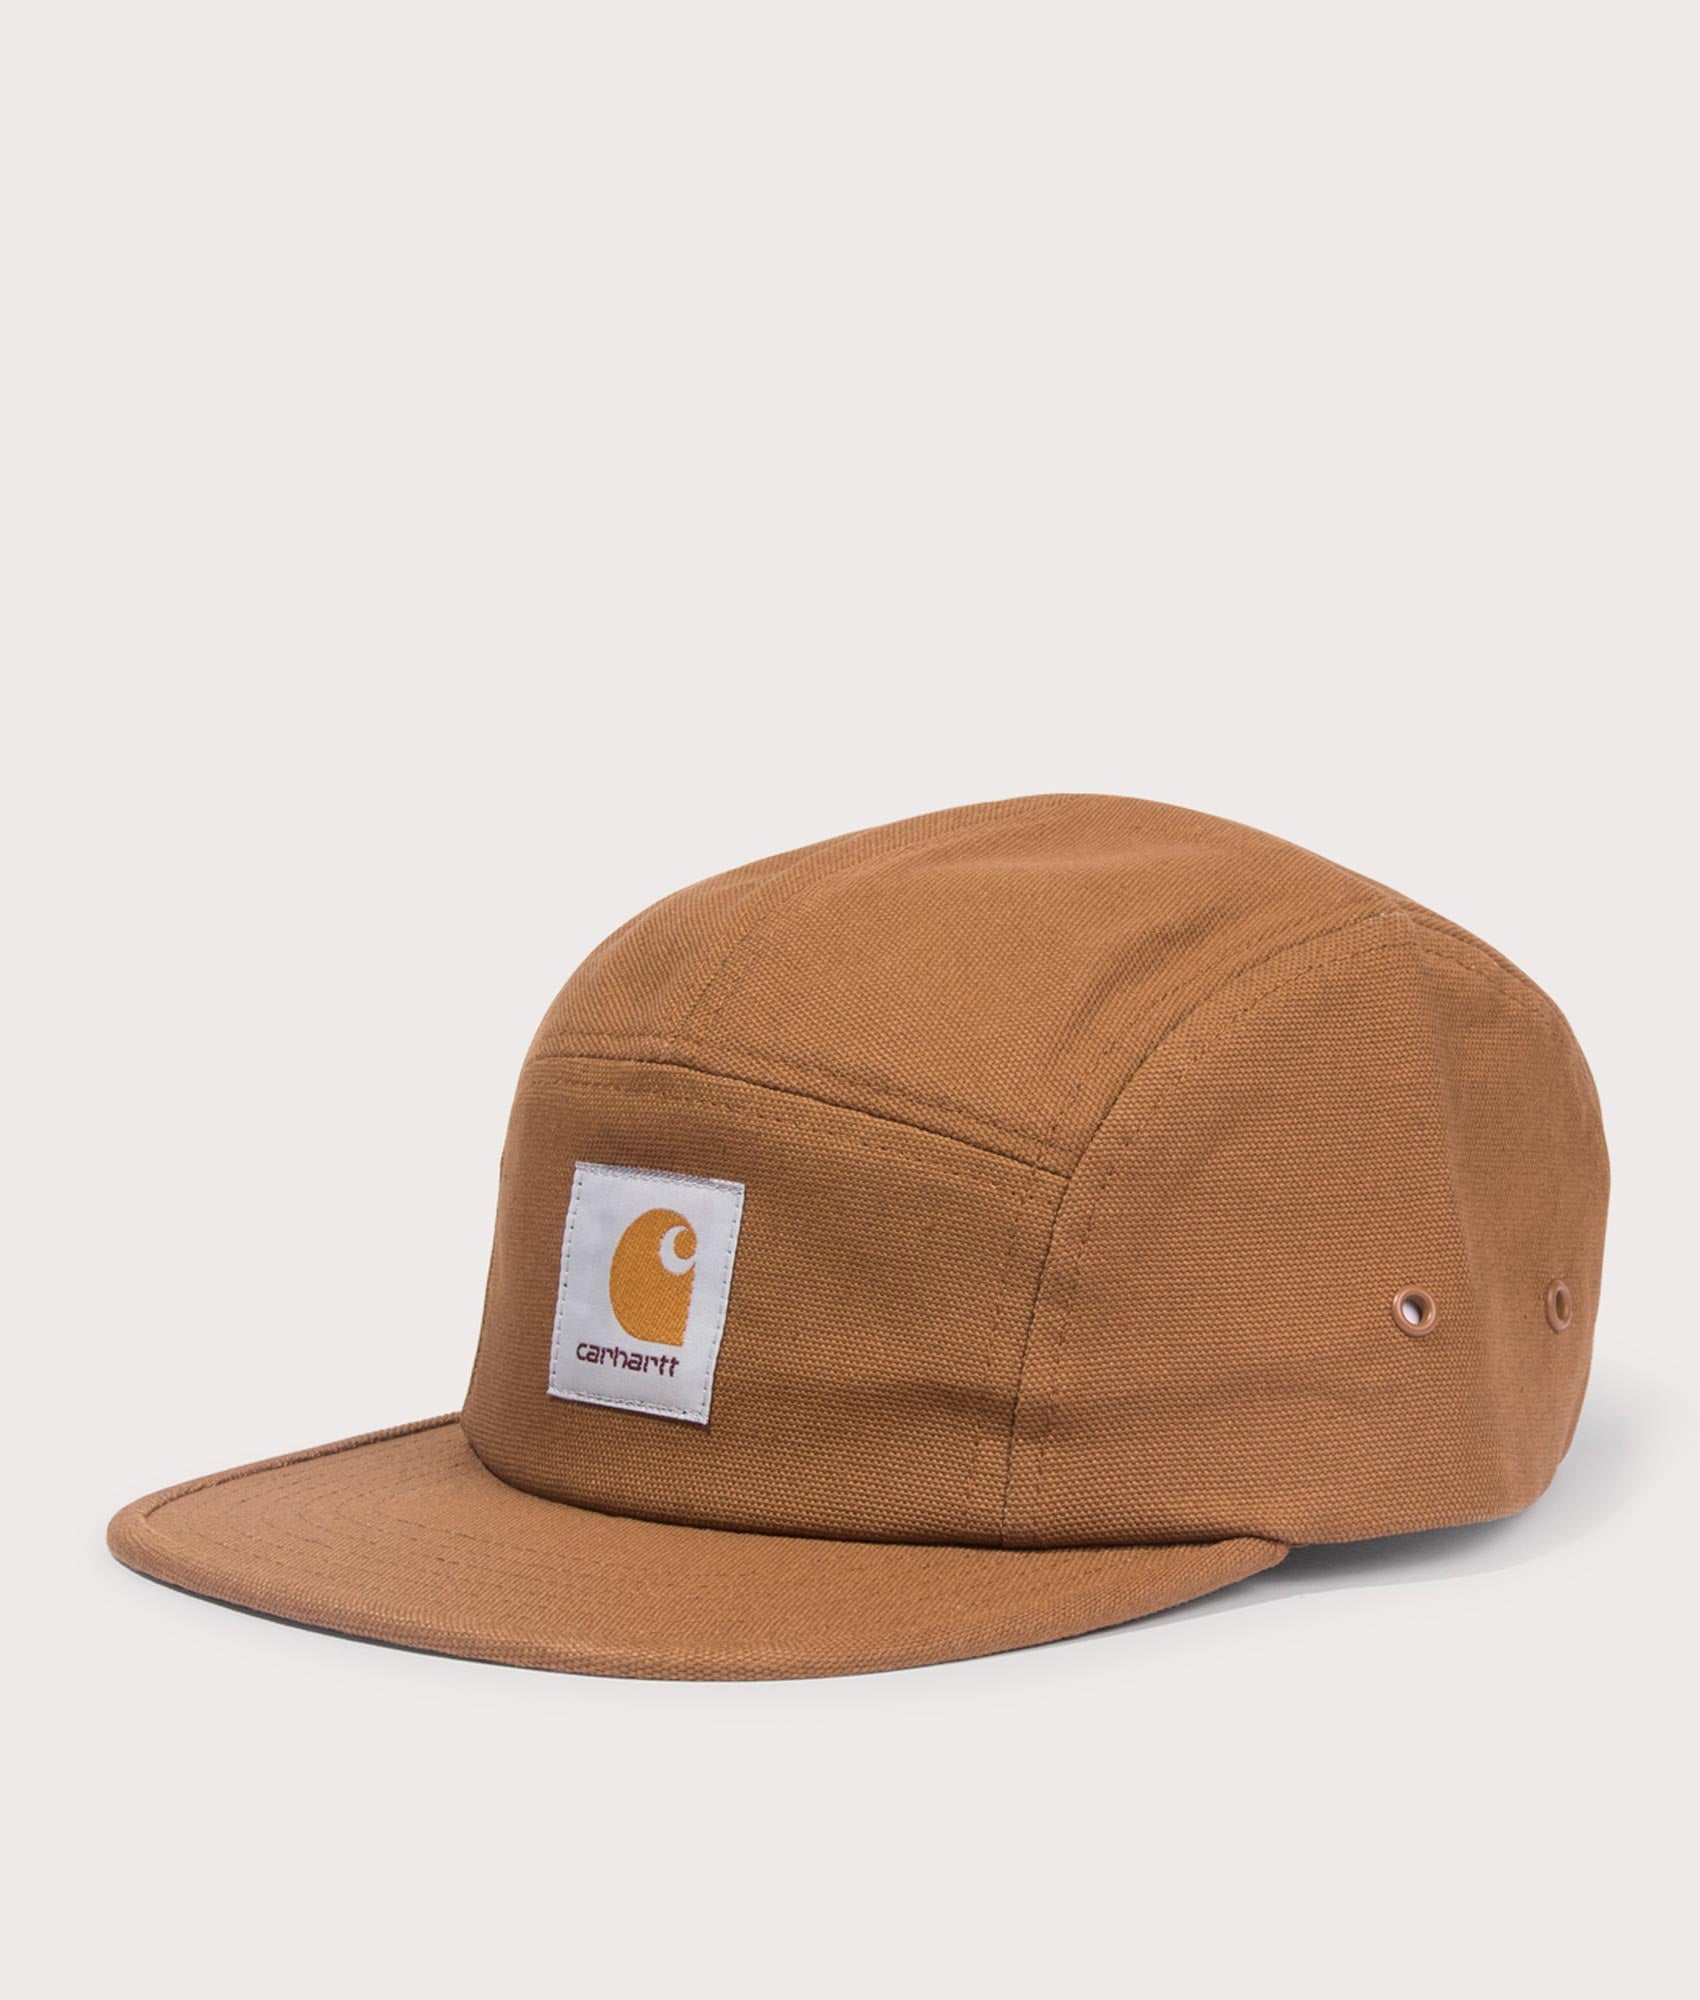 Carhartt WIP Mens Backley Cap - Colour: HZXX Hamilton Brown - Size: One Size